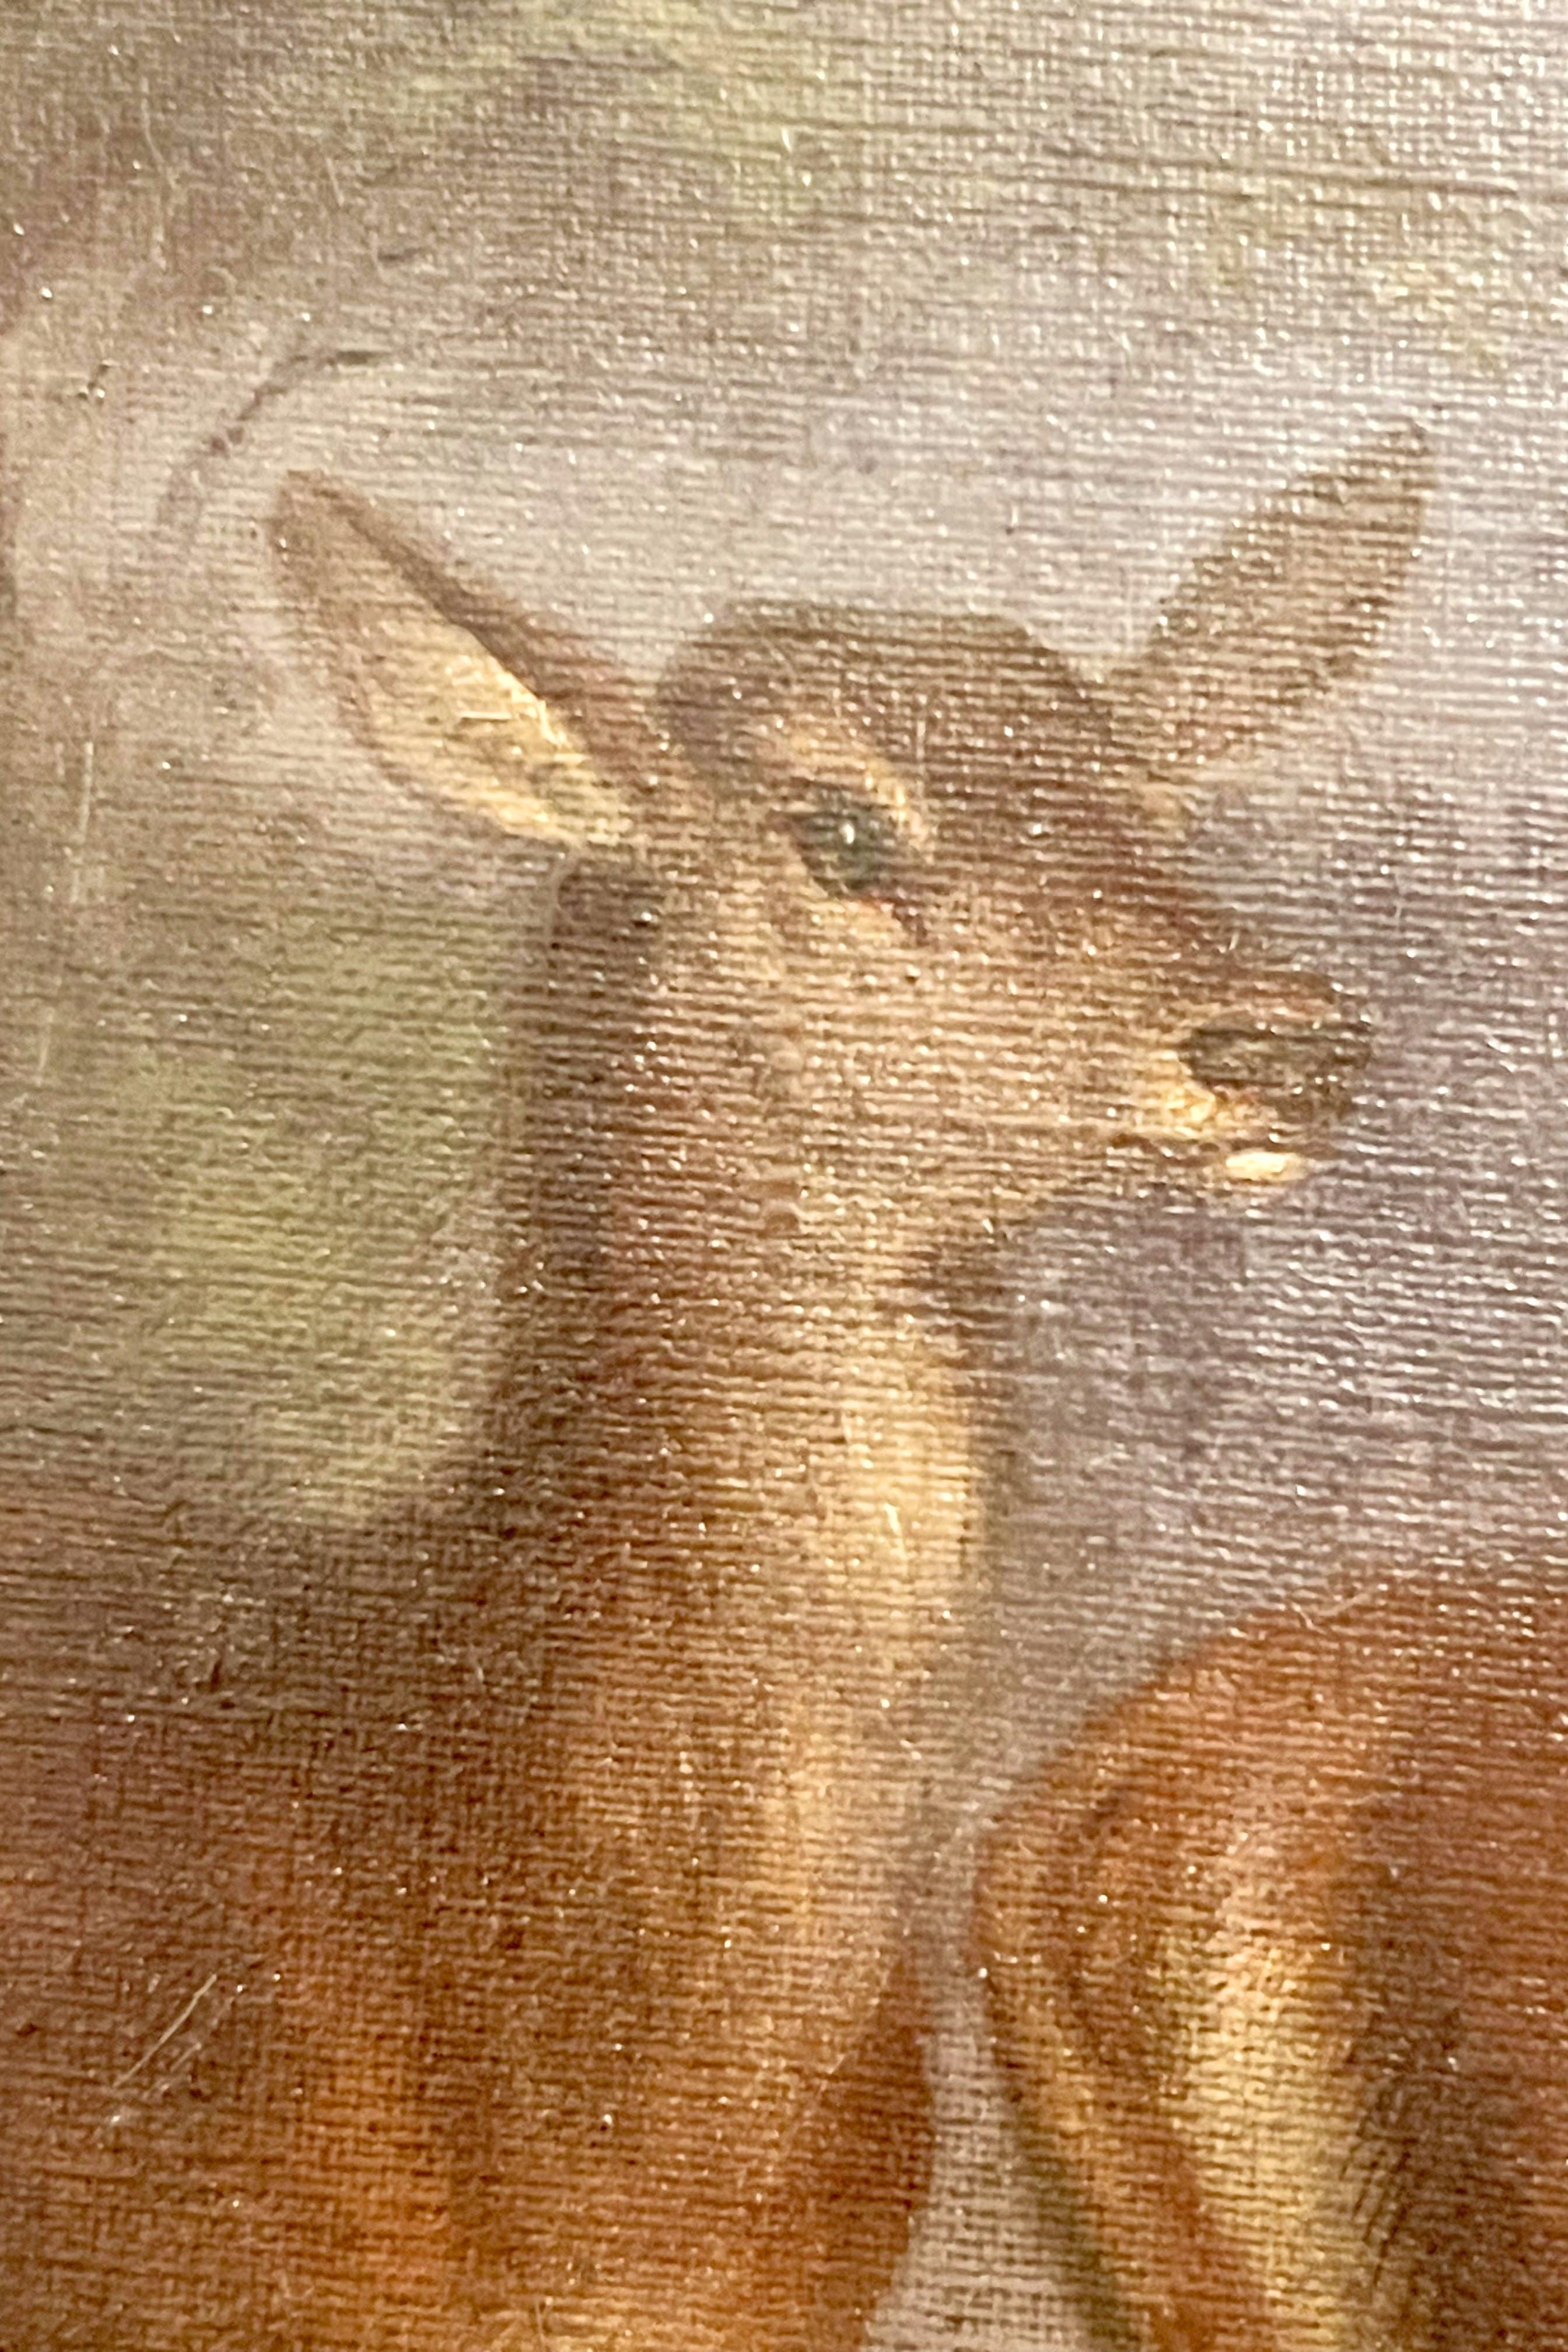 Austrian Painting oil on canvas with wild stags. By Johann Frankenberger, Germany 1840.  For Sale